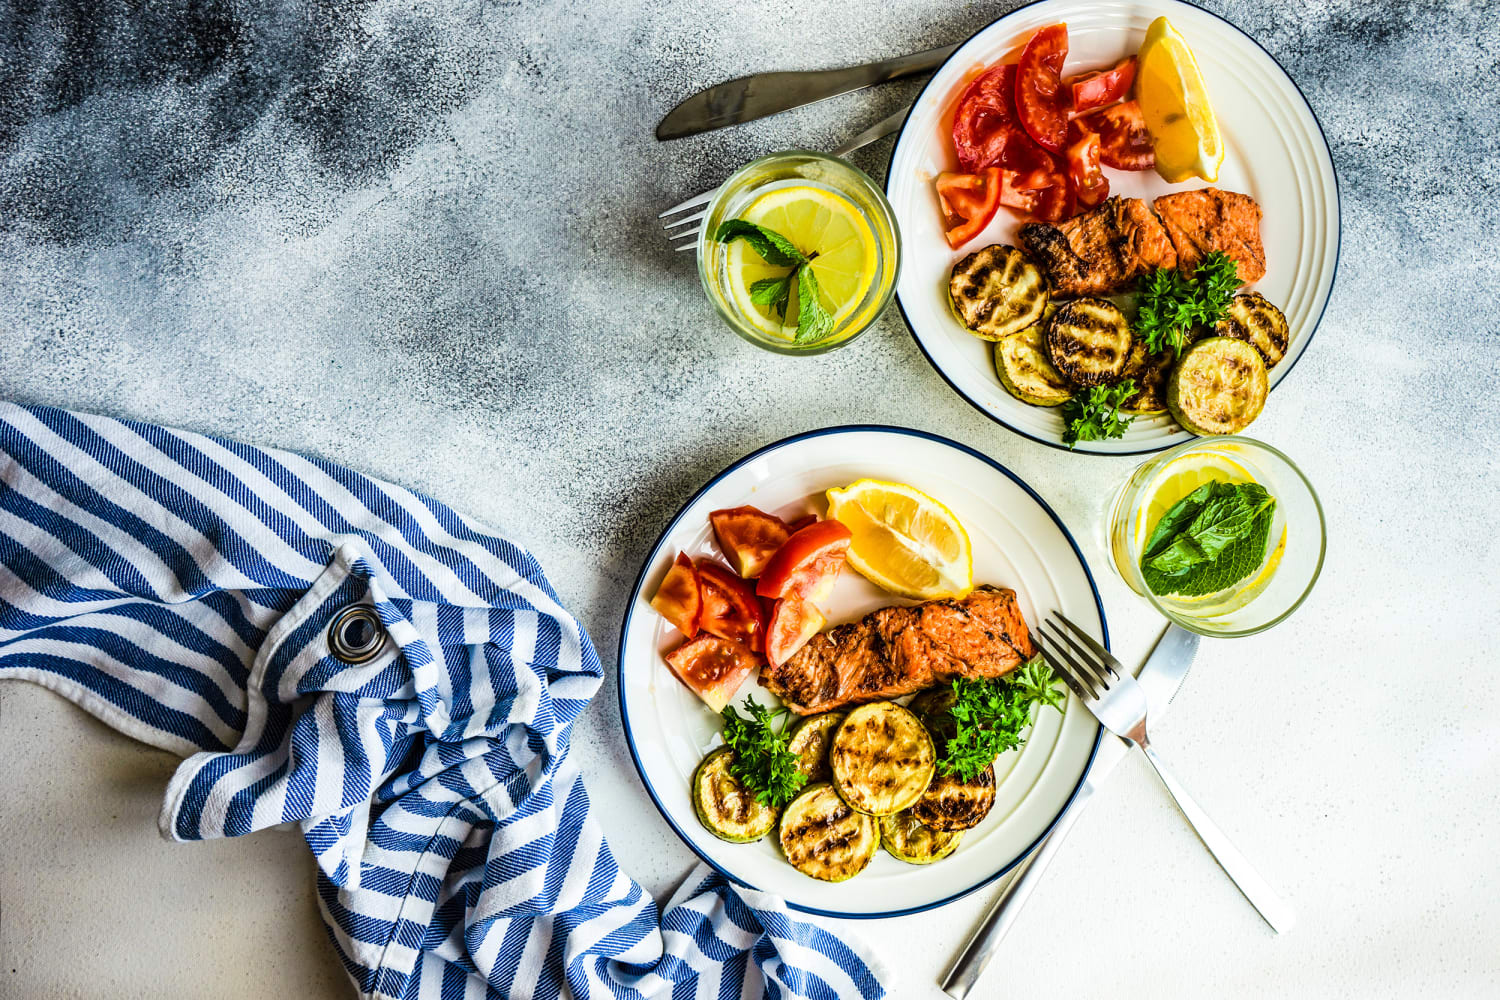 4 easy low-carb diet meal plans from dietitians